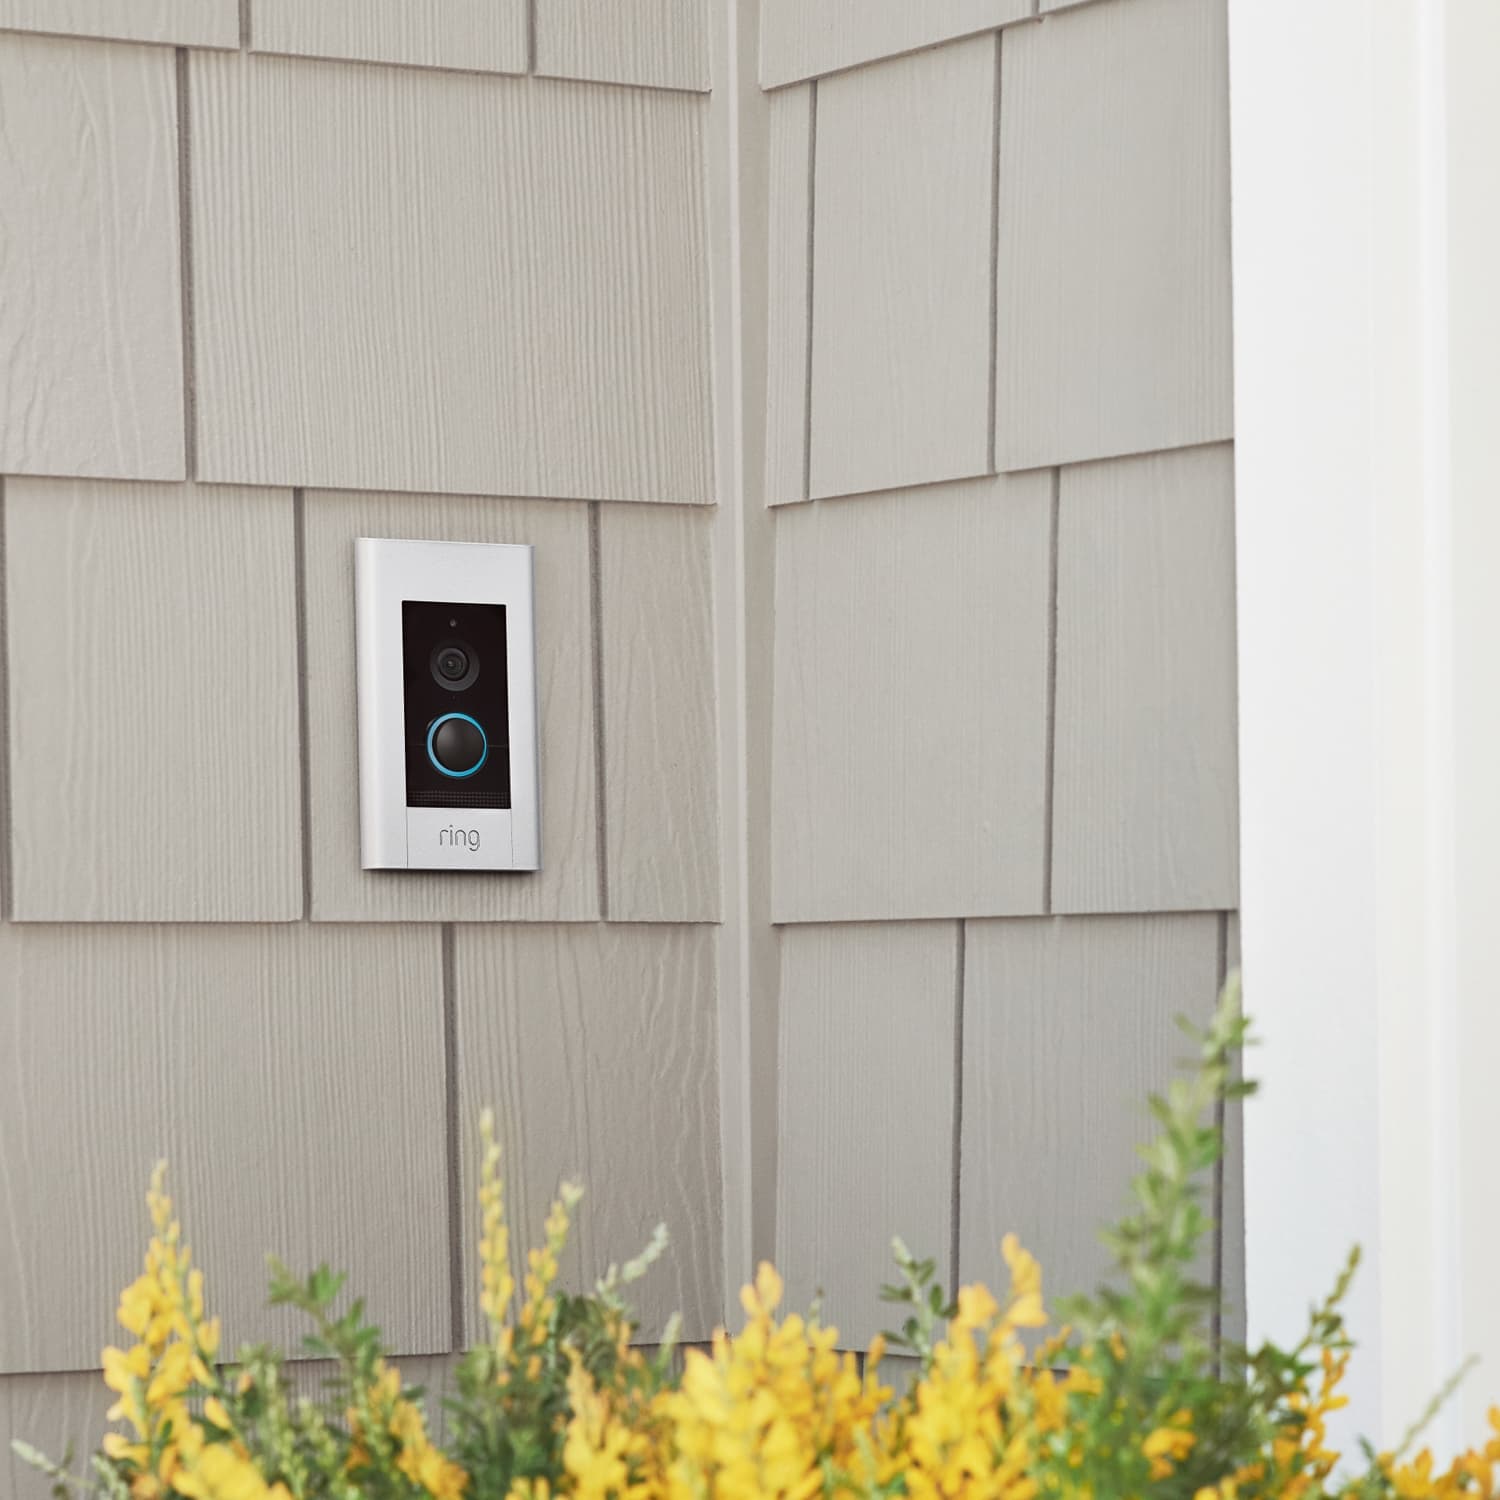 Video Doorbell Elite (Power over Ethernet) - Video Doorbell Elite with pearl white finish mounted on shingle siding of a home near a corner.